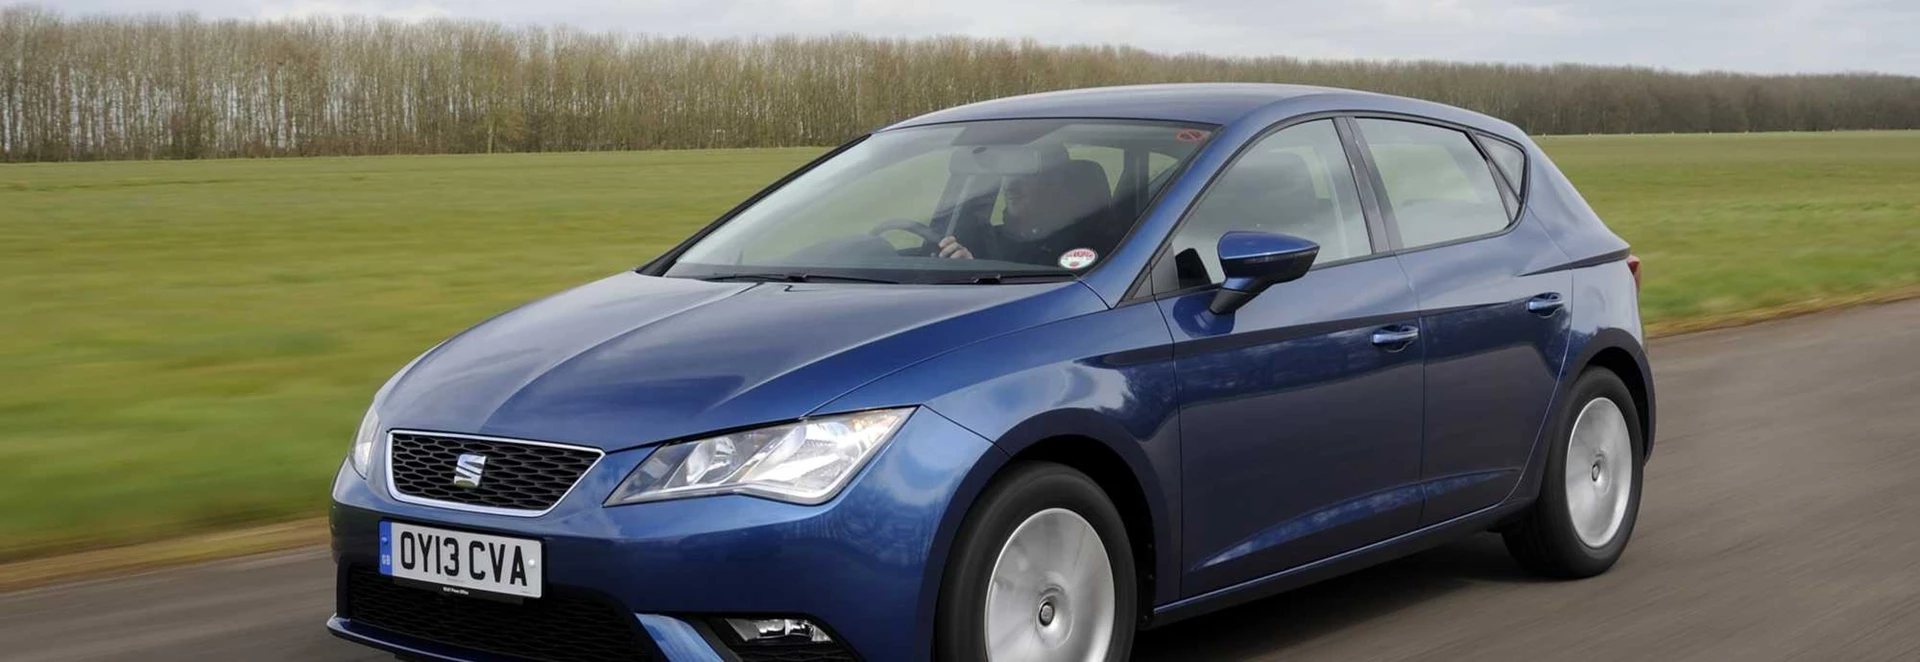 SEAT Leon hatchback review 